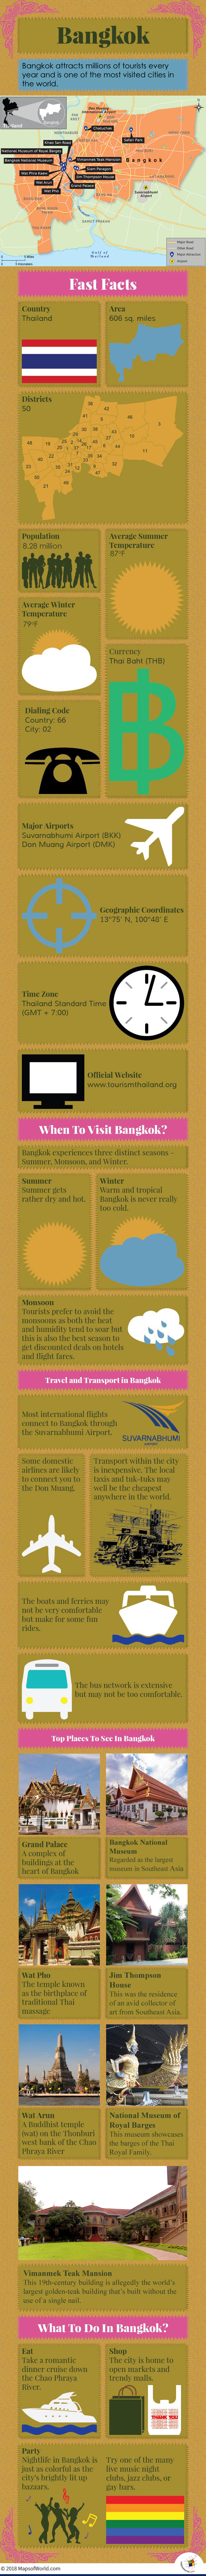 Infographic Depicting Bangkok Tourist Attractions